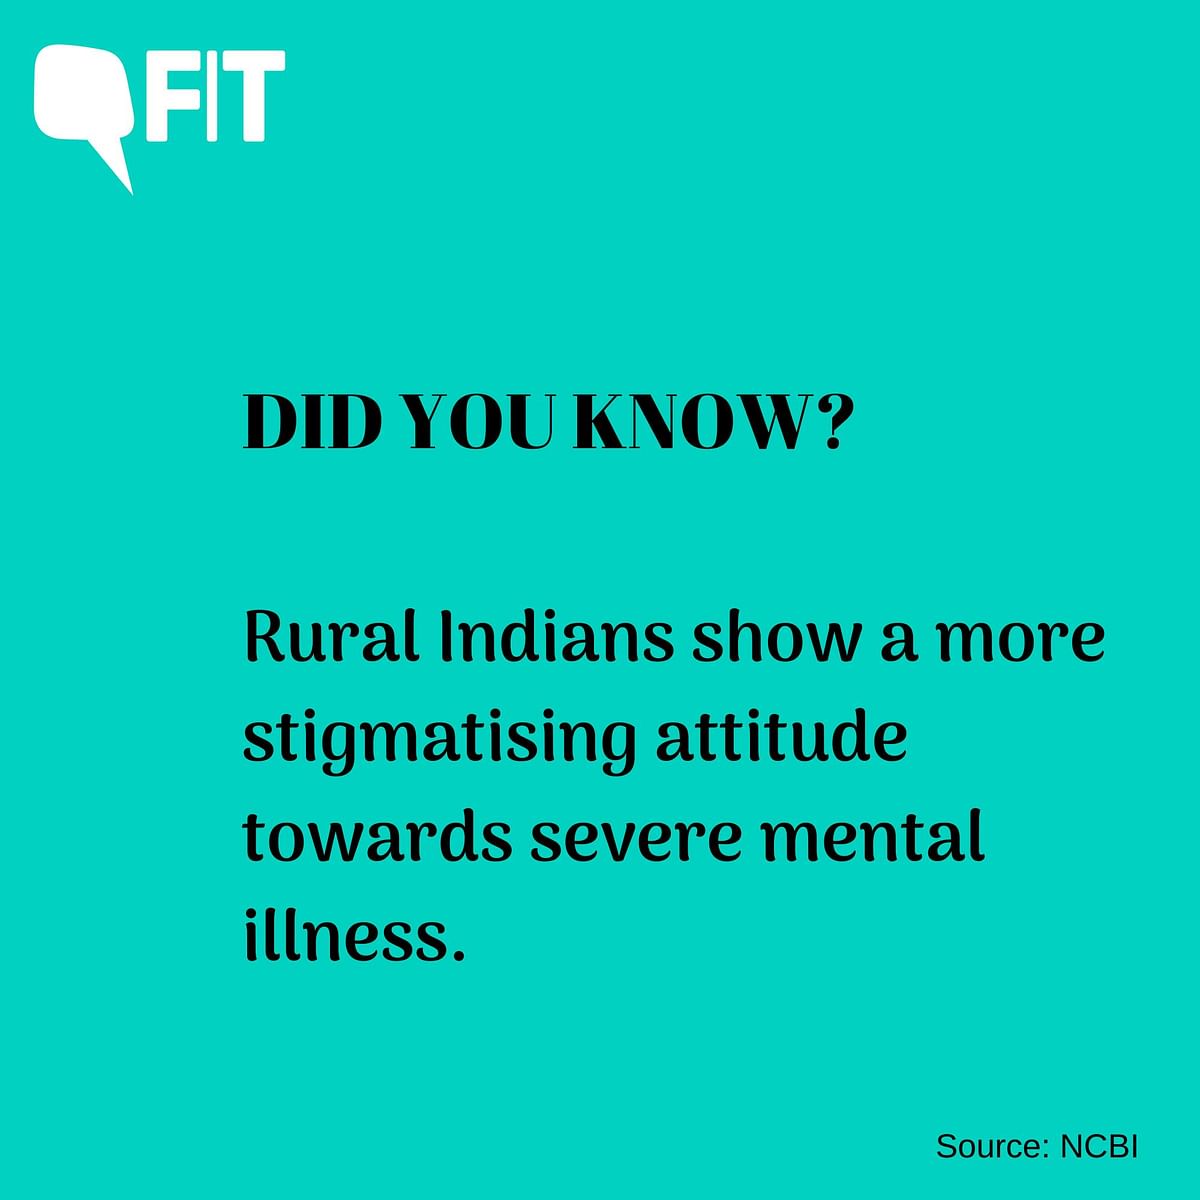 We need to fight the stigma and reluctance to discuss depression in rural India in order to treat it.